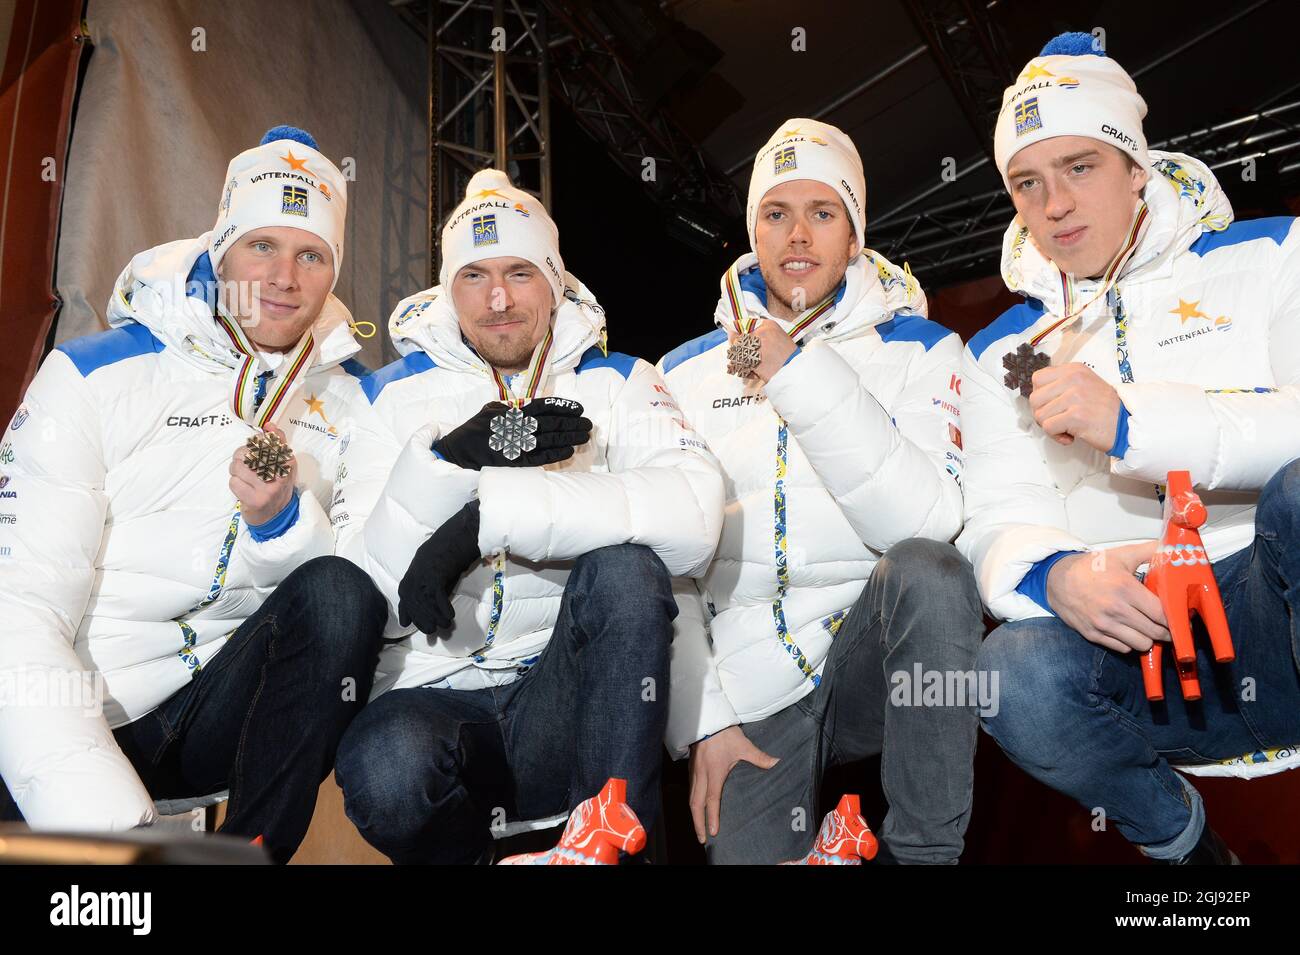 Silver medalists Daniel Richardsson, Johan Olsson, Marcus Hellner and Calle Halfvarsson (L-R) from Sweden pose on the podium during the medal ceremony after the men's 4x10 km (M) cross-country relay at the 2015 FIS Nordic Skiing World Championships in Falun, Sweden, February 27, 2015. Photo: Fredrik Sandberg / TT code 10080 Stock Photo